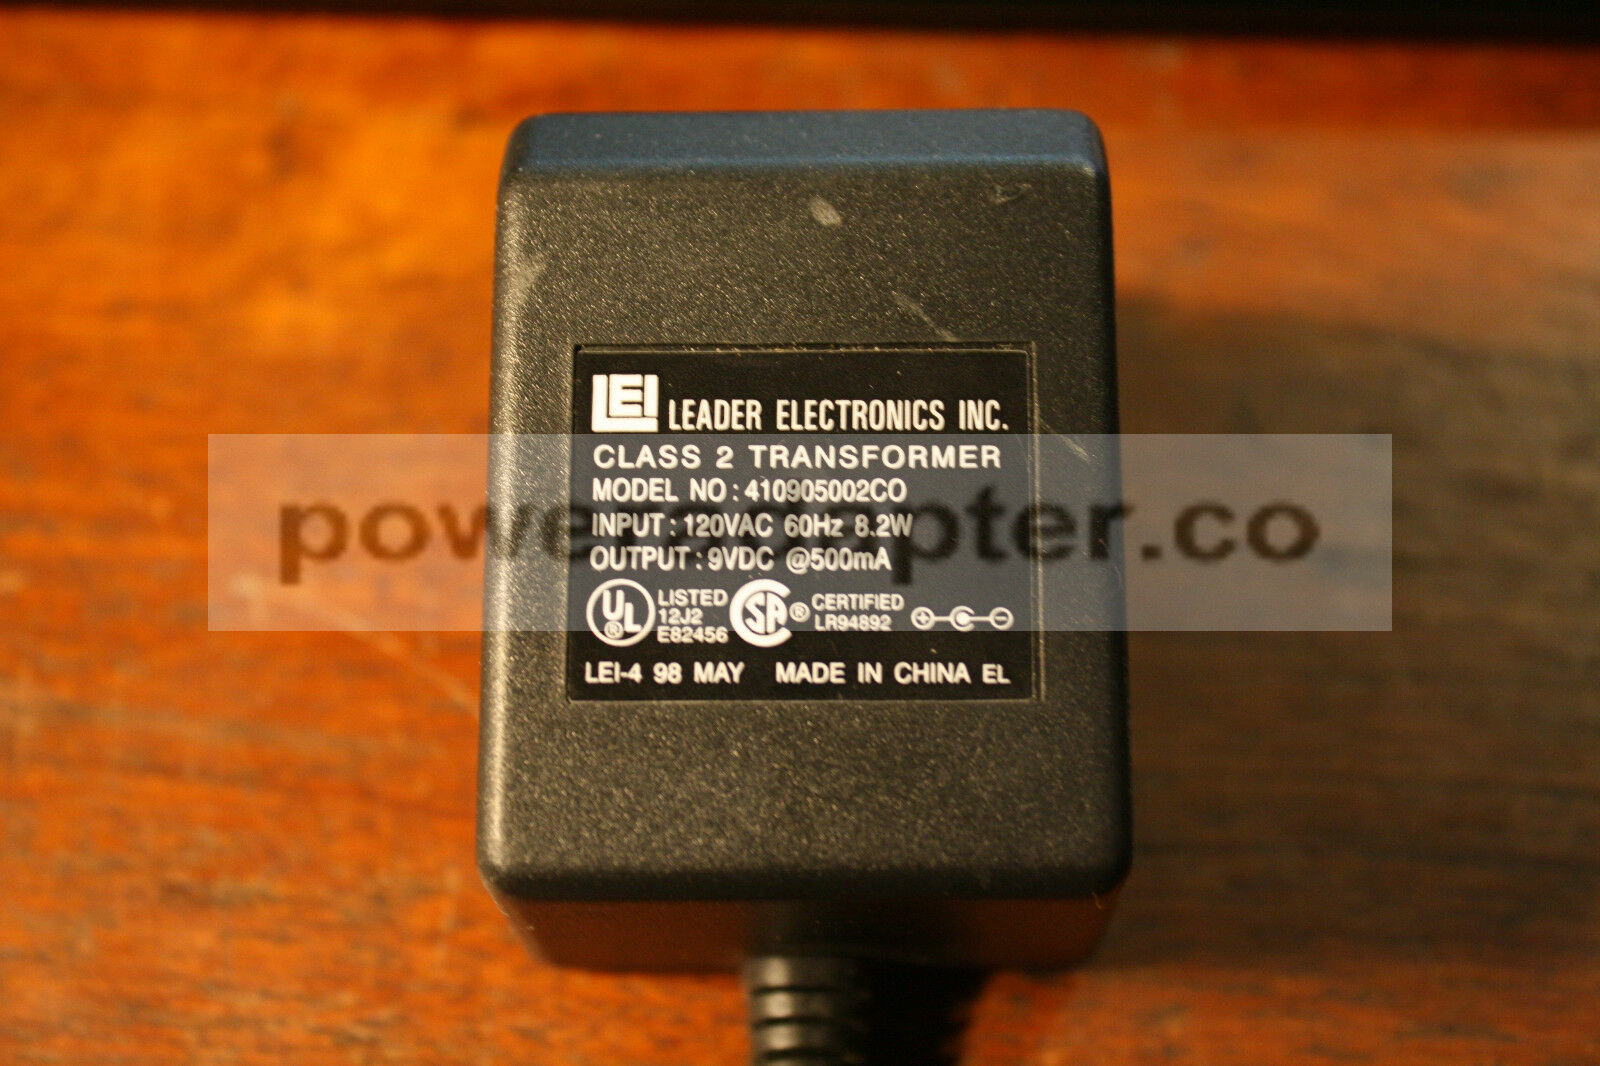 Leader Electronics 410905002CO 9vdc 500mA AC Adapter Condition: Used: An item that has been used previously. The ite - Click Image to Close